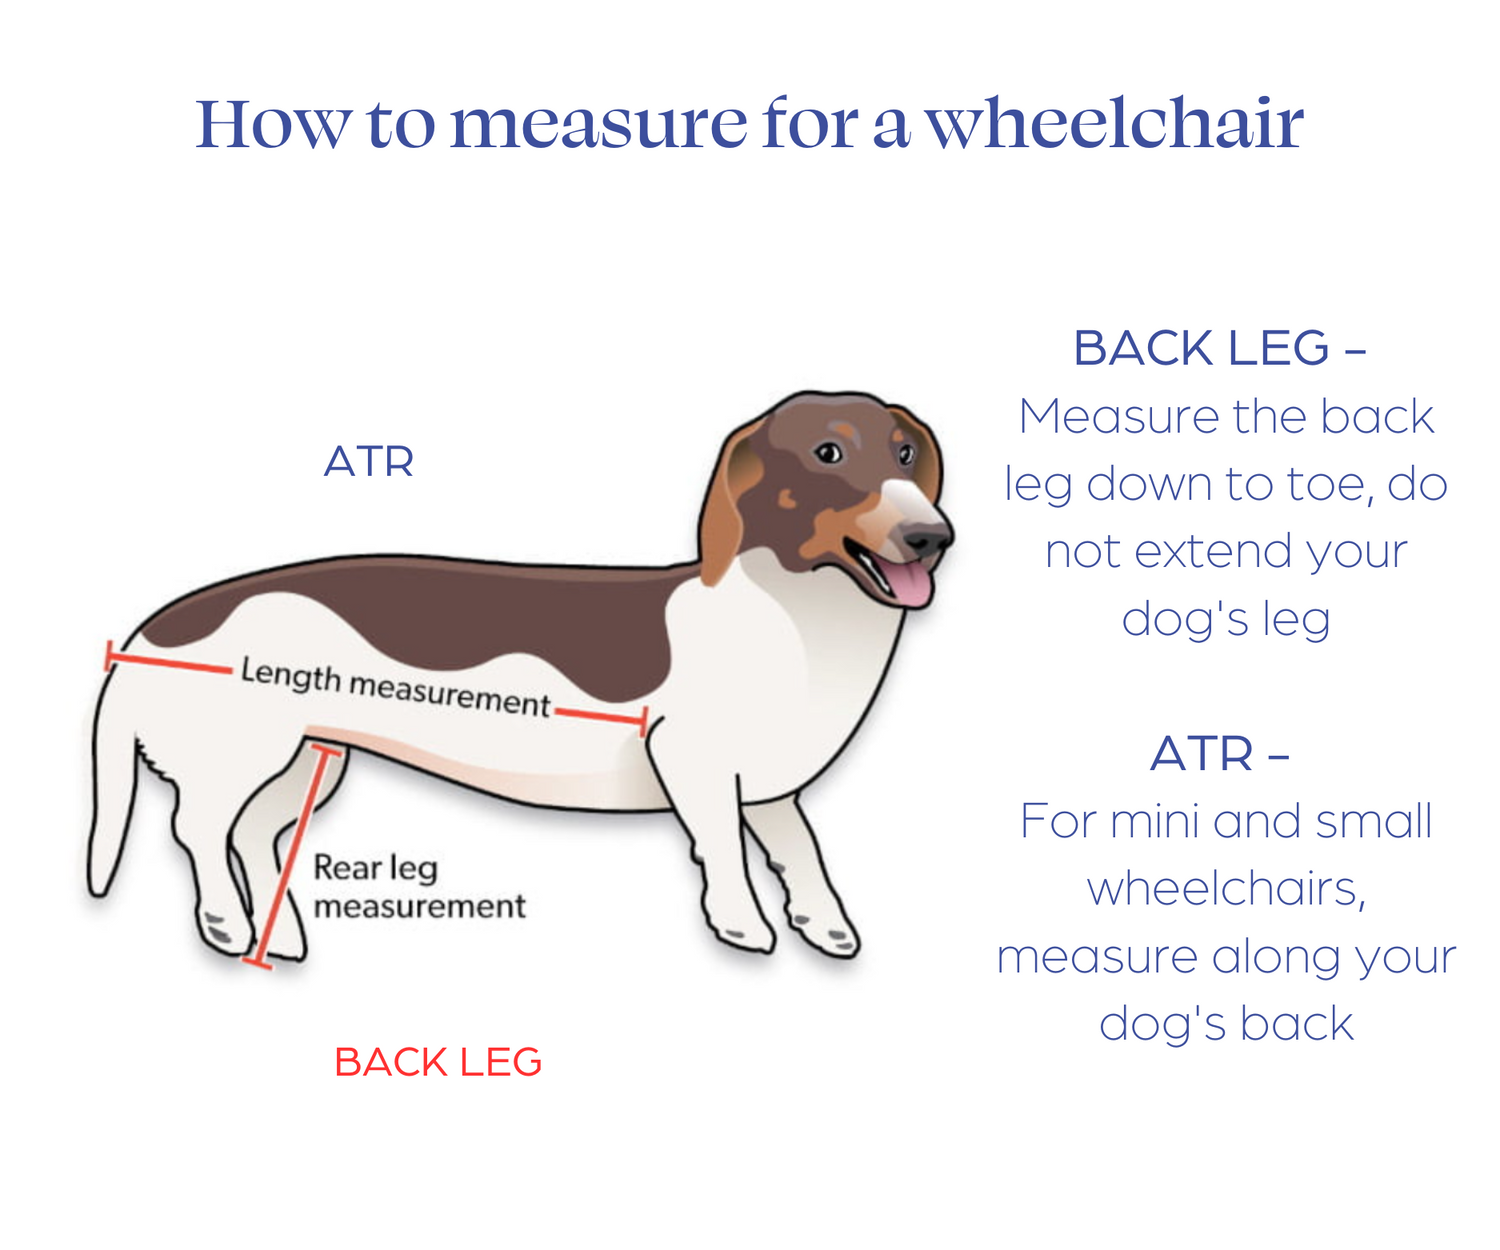 How to Measure the Dachshund Wheelchair